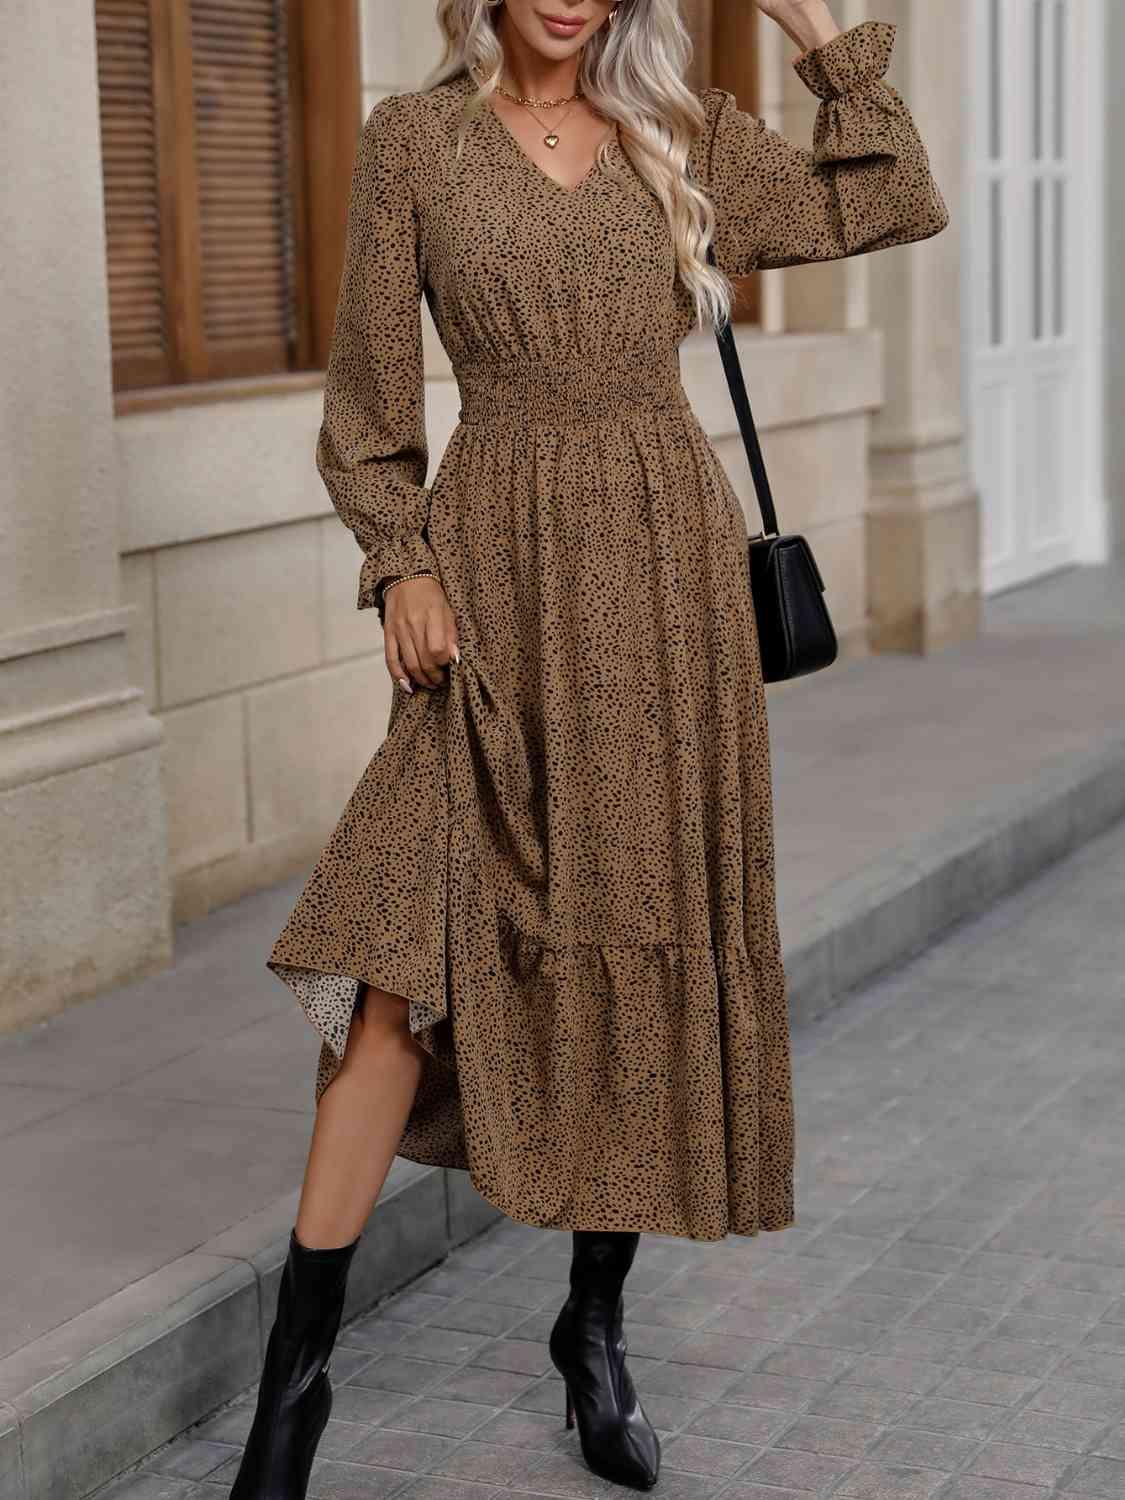 a woman wearing a brown dress and black boots